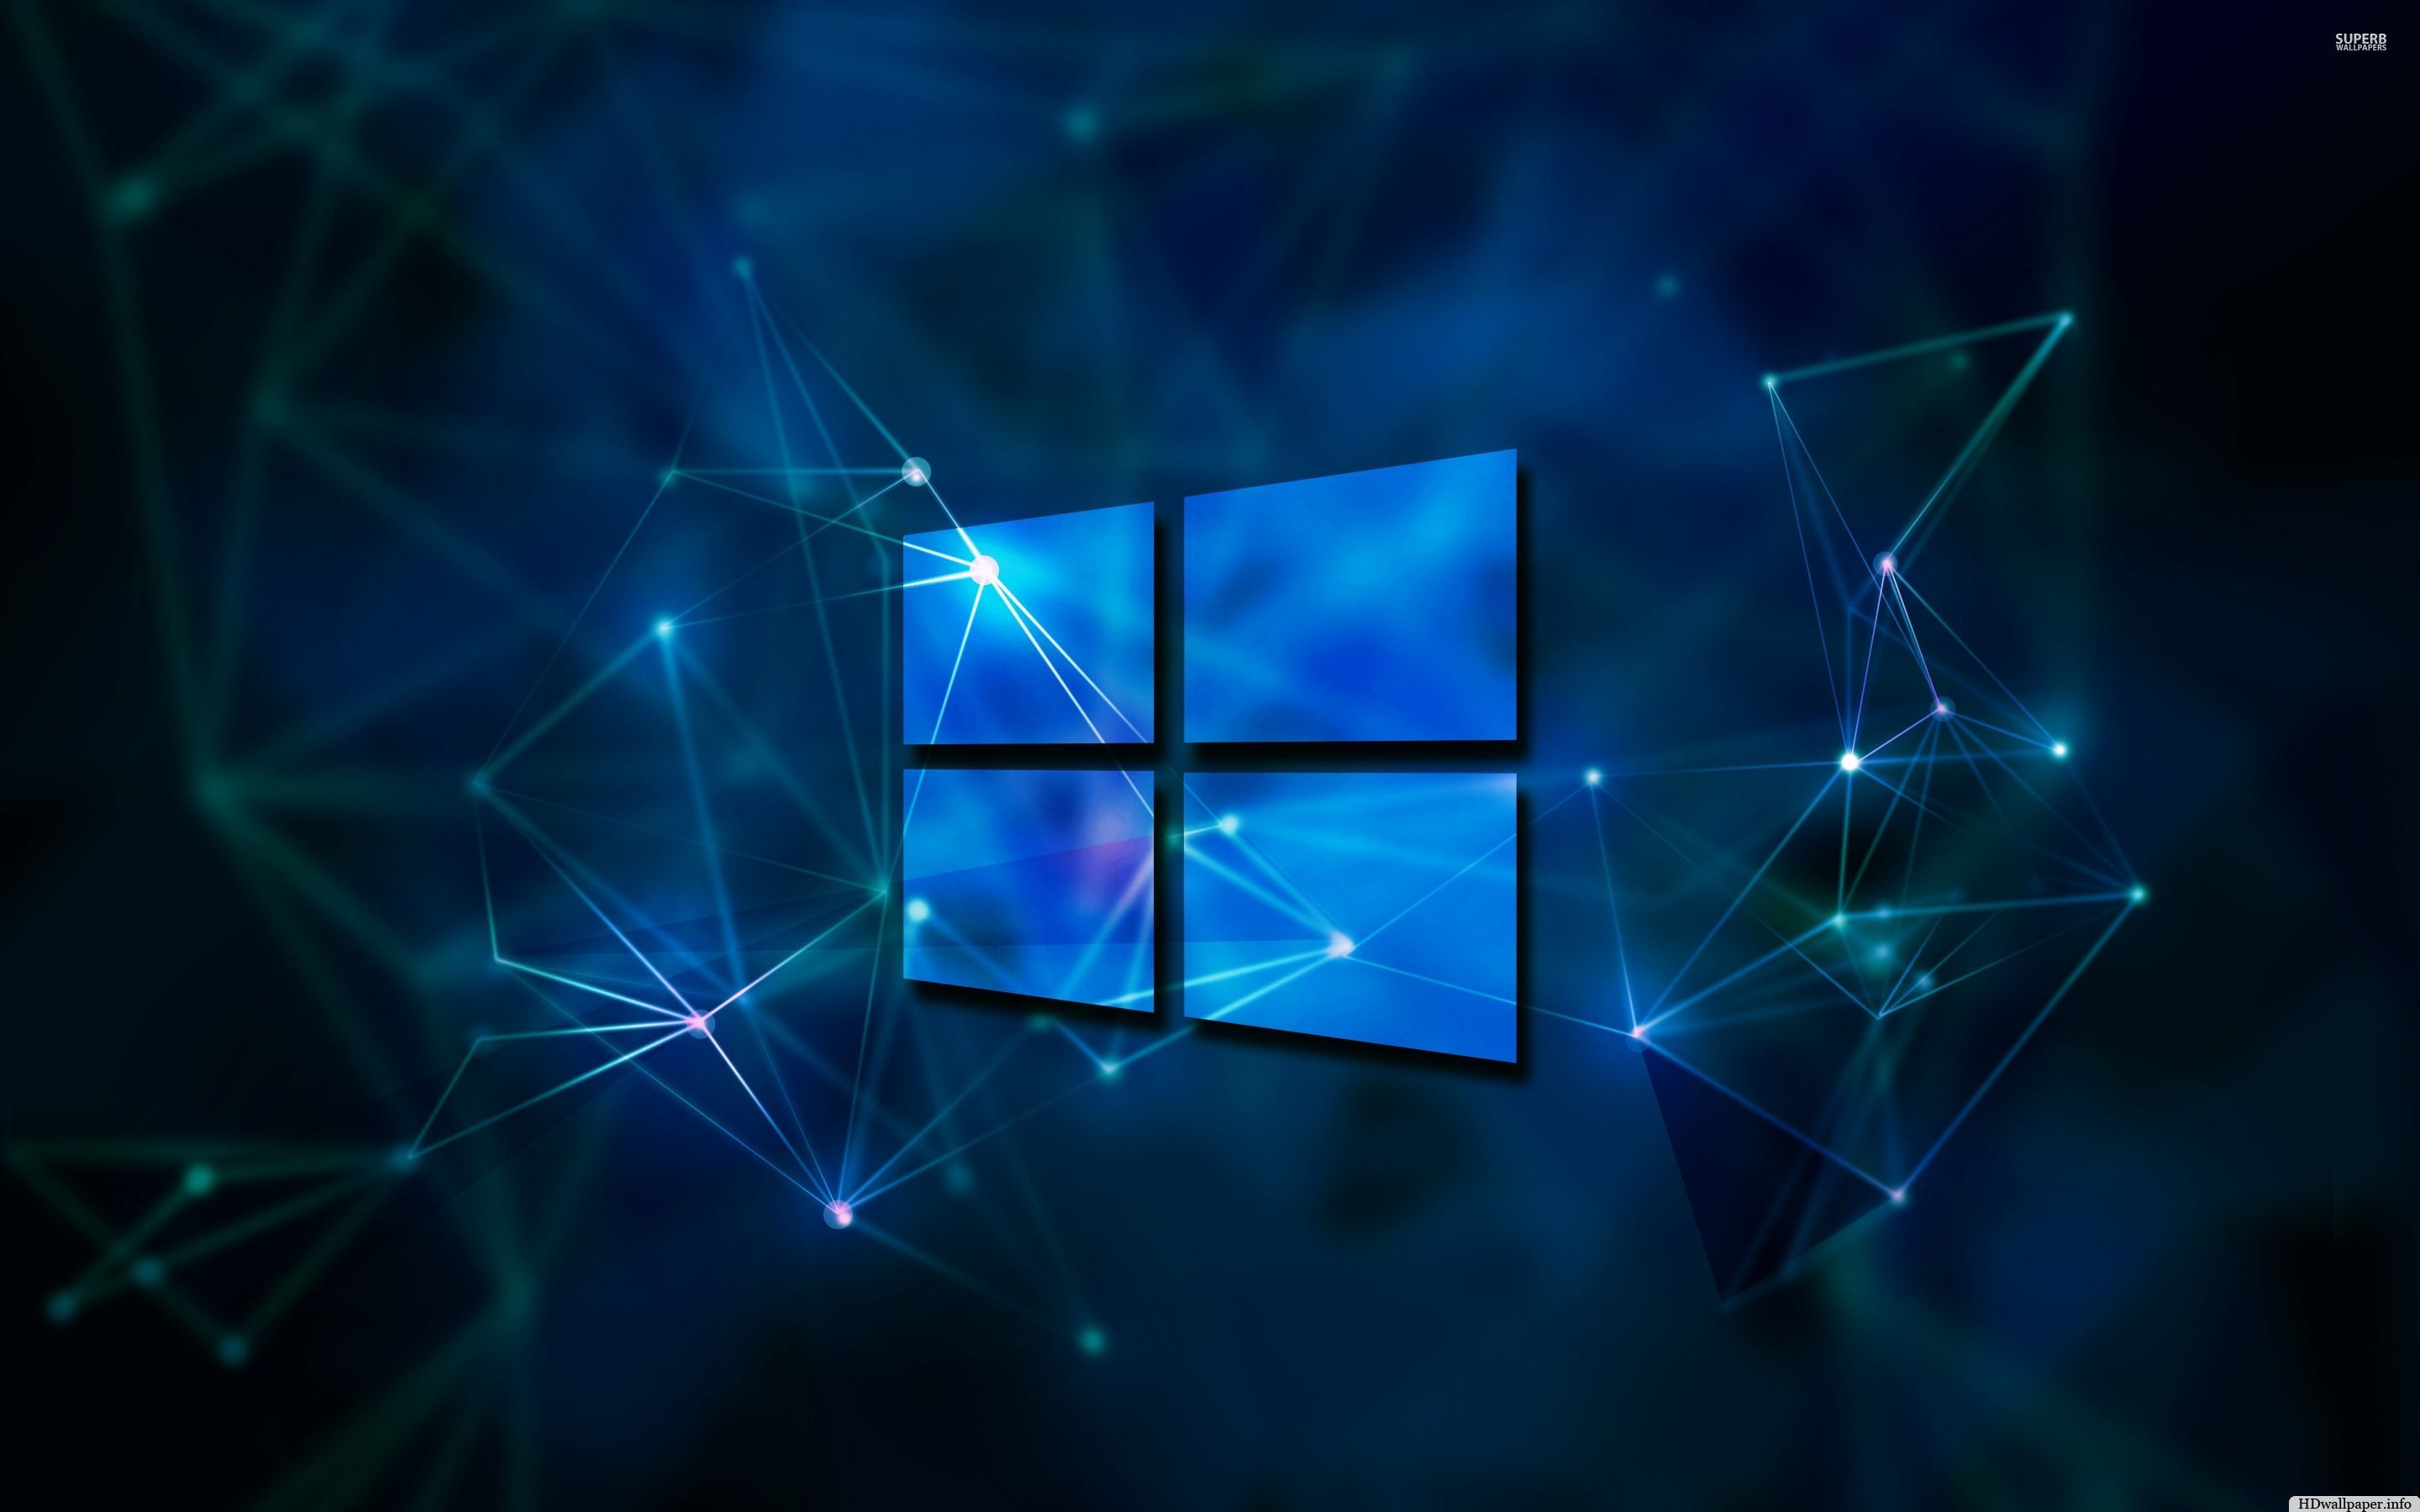 Windows 10 Default Desktop Backgrounds posted by Ethan Tremblay